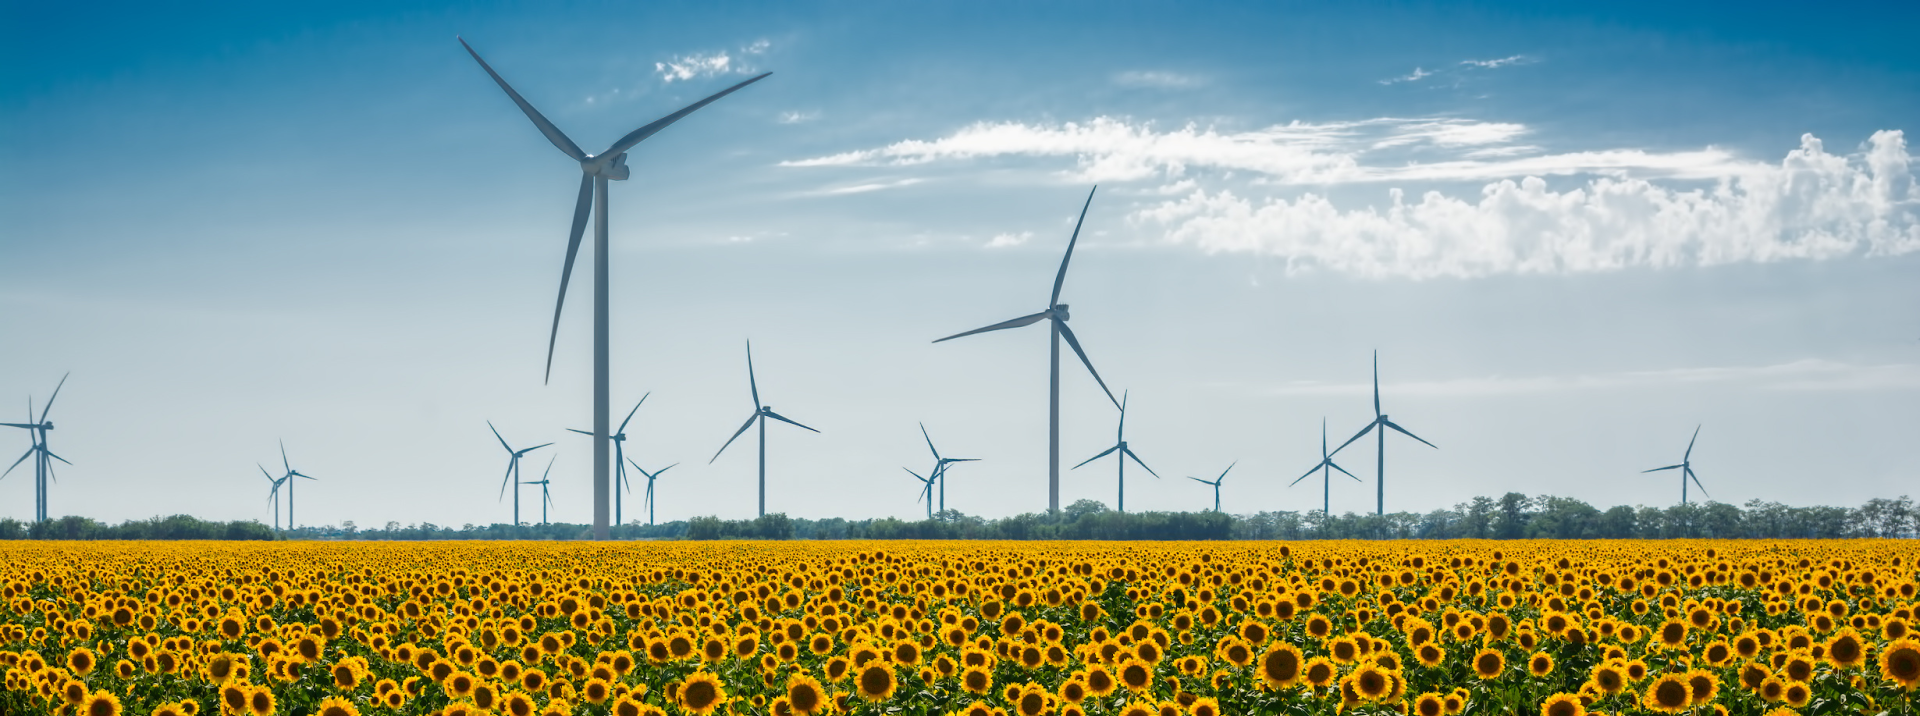 Field with sunflowers and eco power, wind turbines